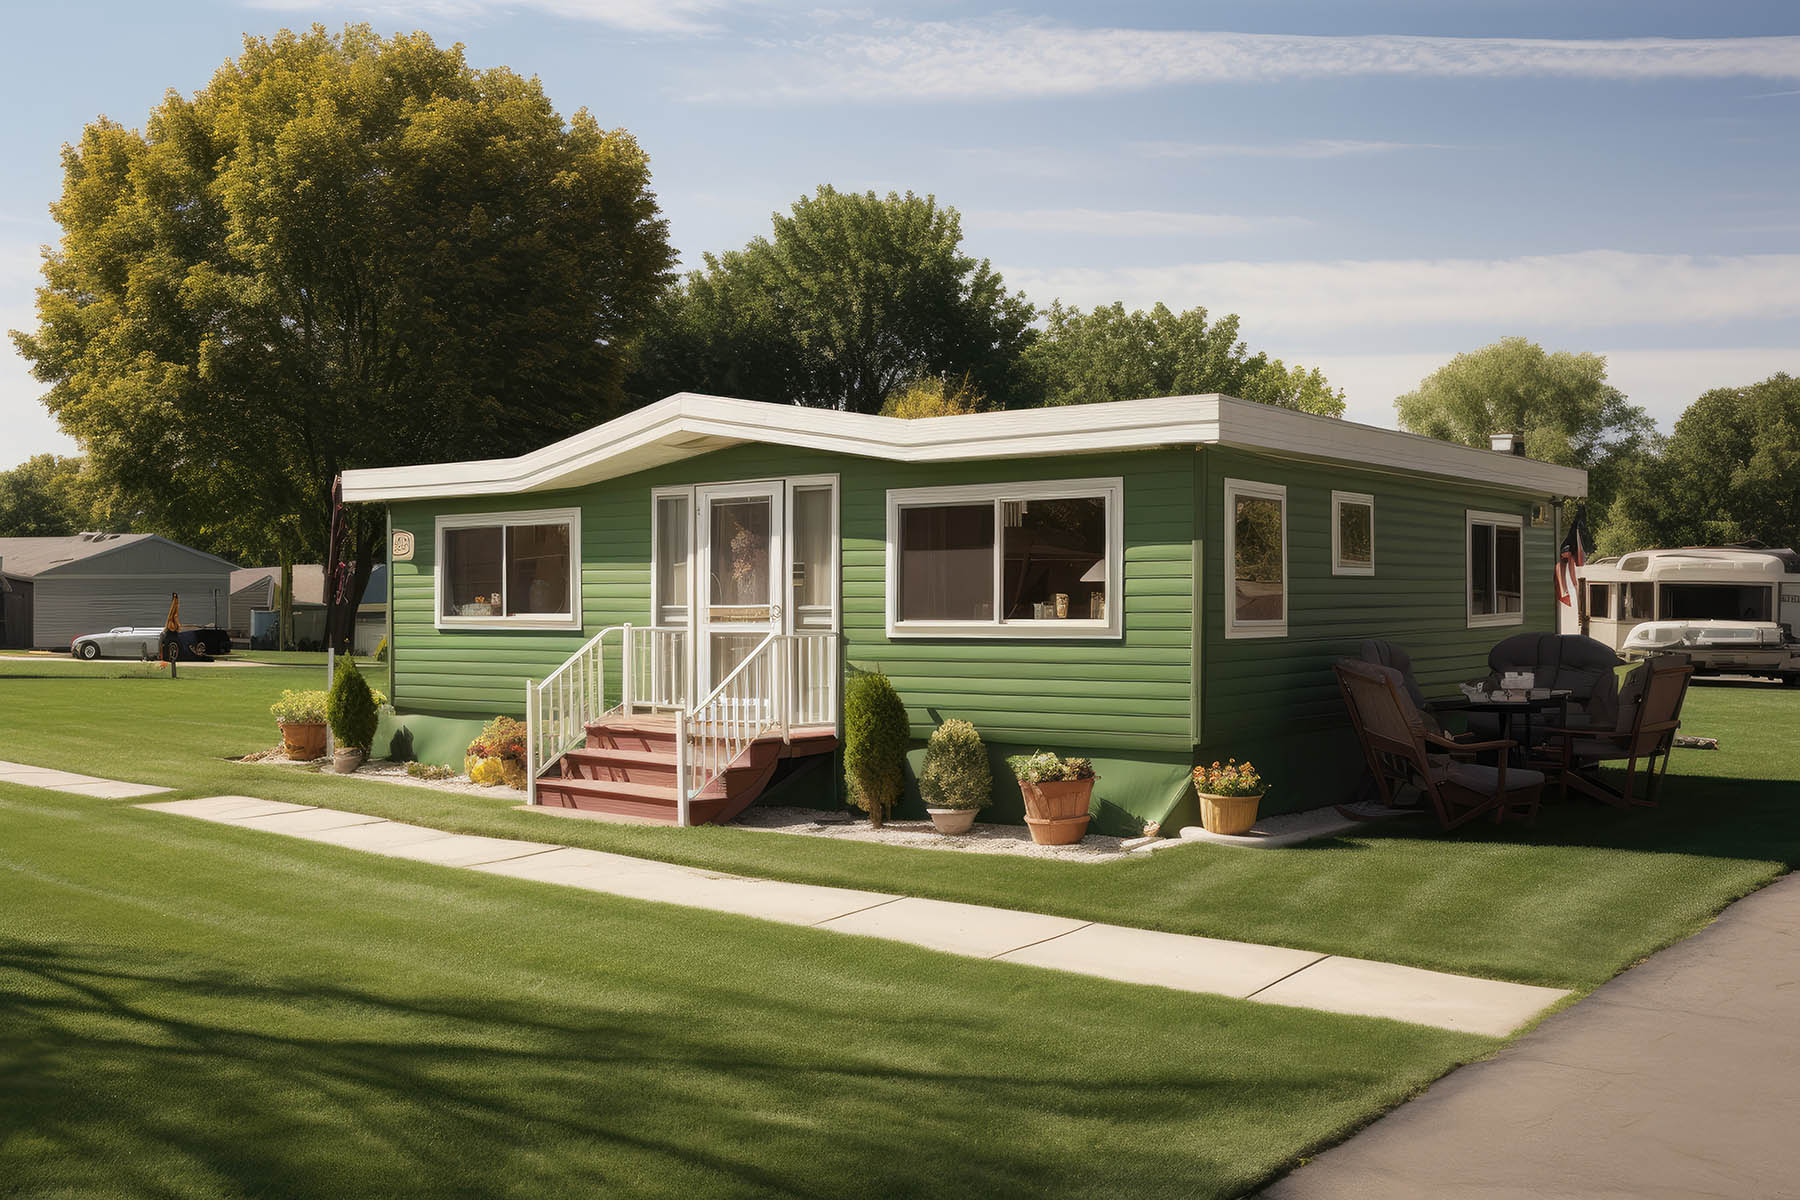 A Glimpse into Modular Home Communities: Is It Right for You?